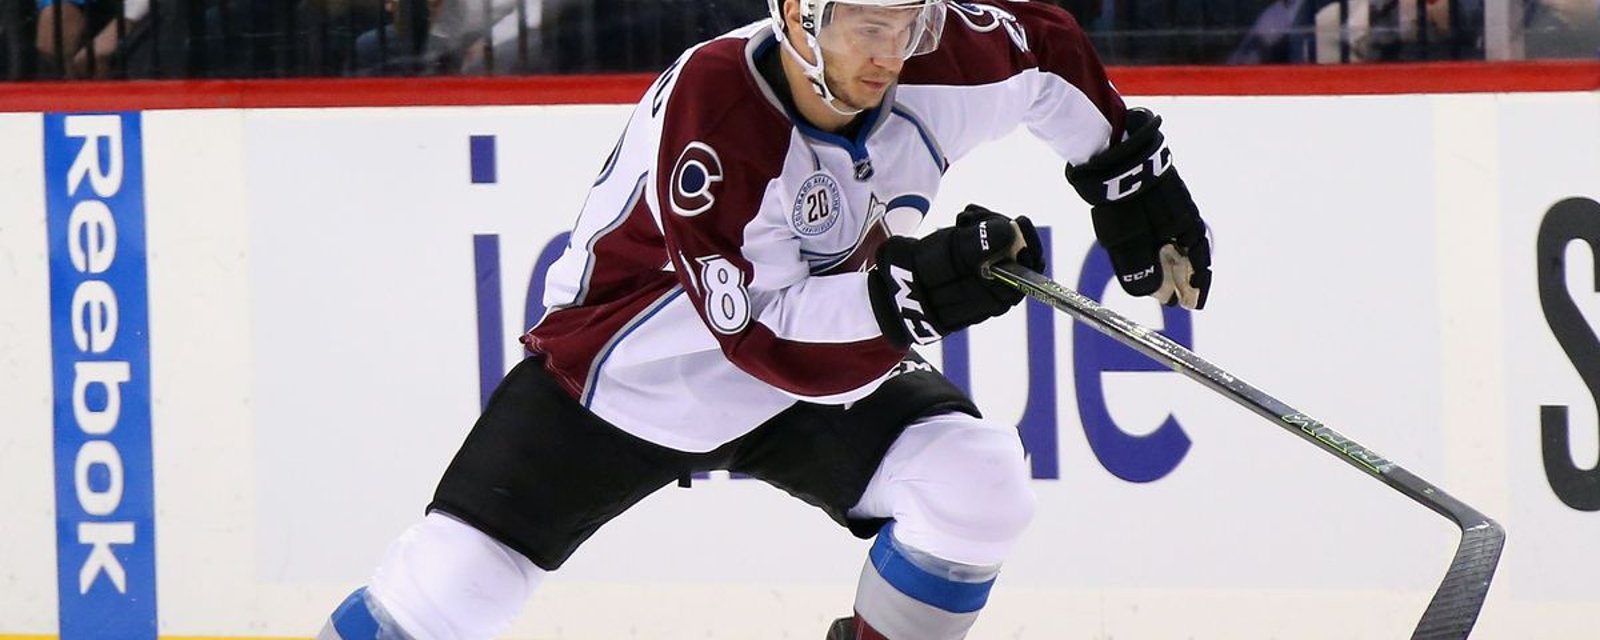 Breaking: Avalanche waives forward after clinching playoff spot